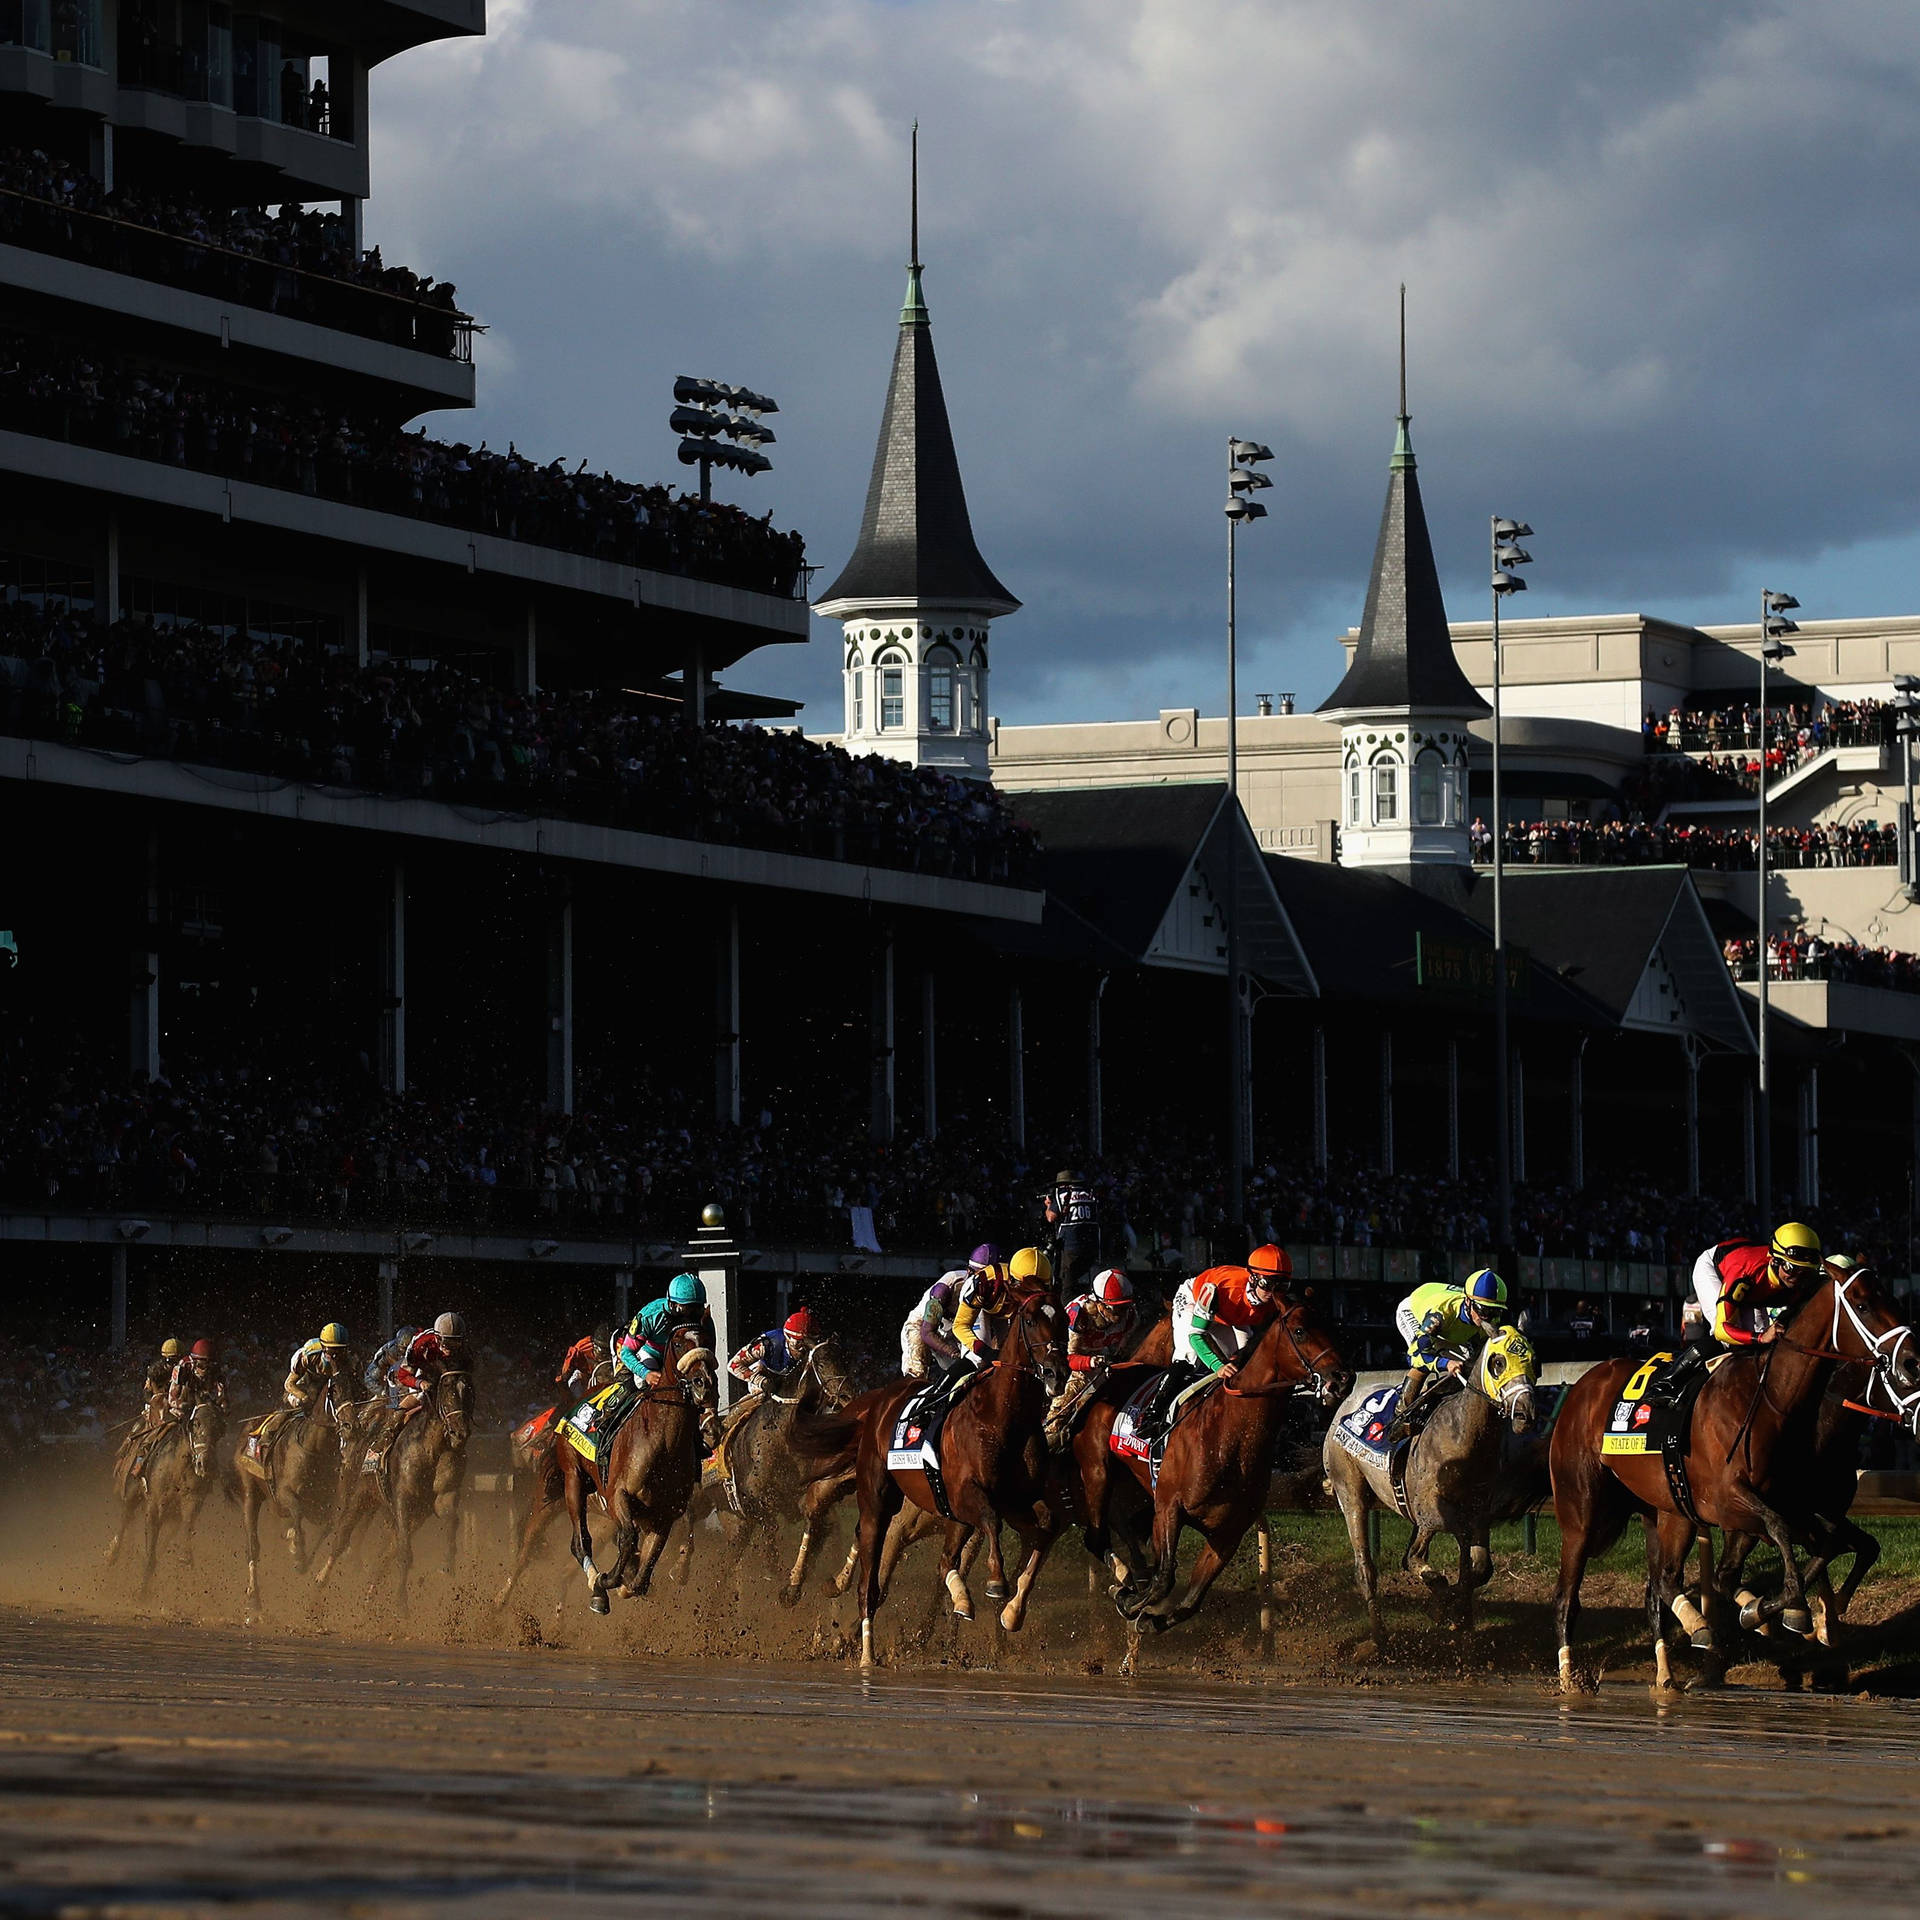 Thrilling Moments From The Kentucky Derby